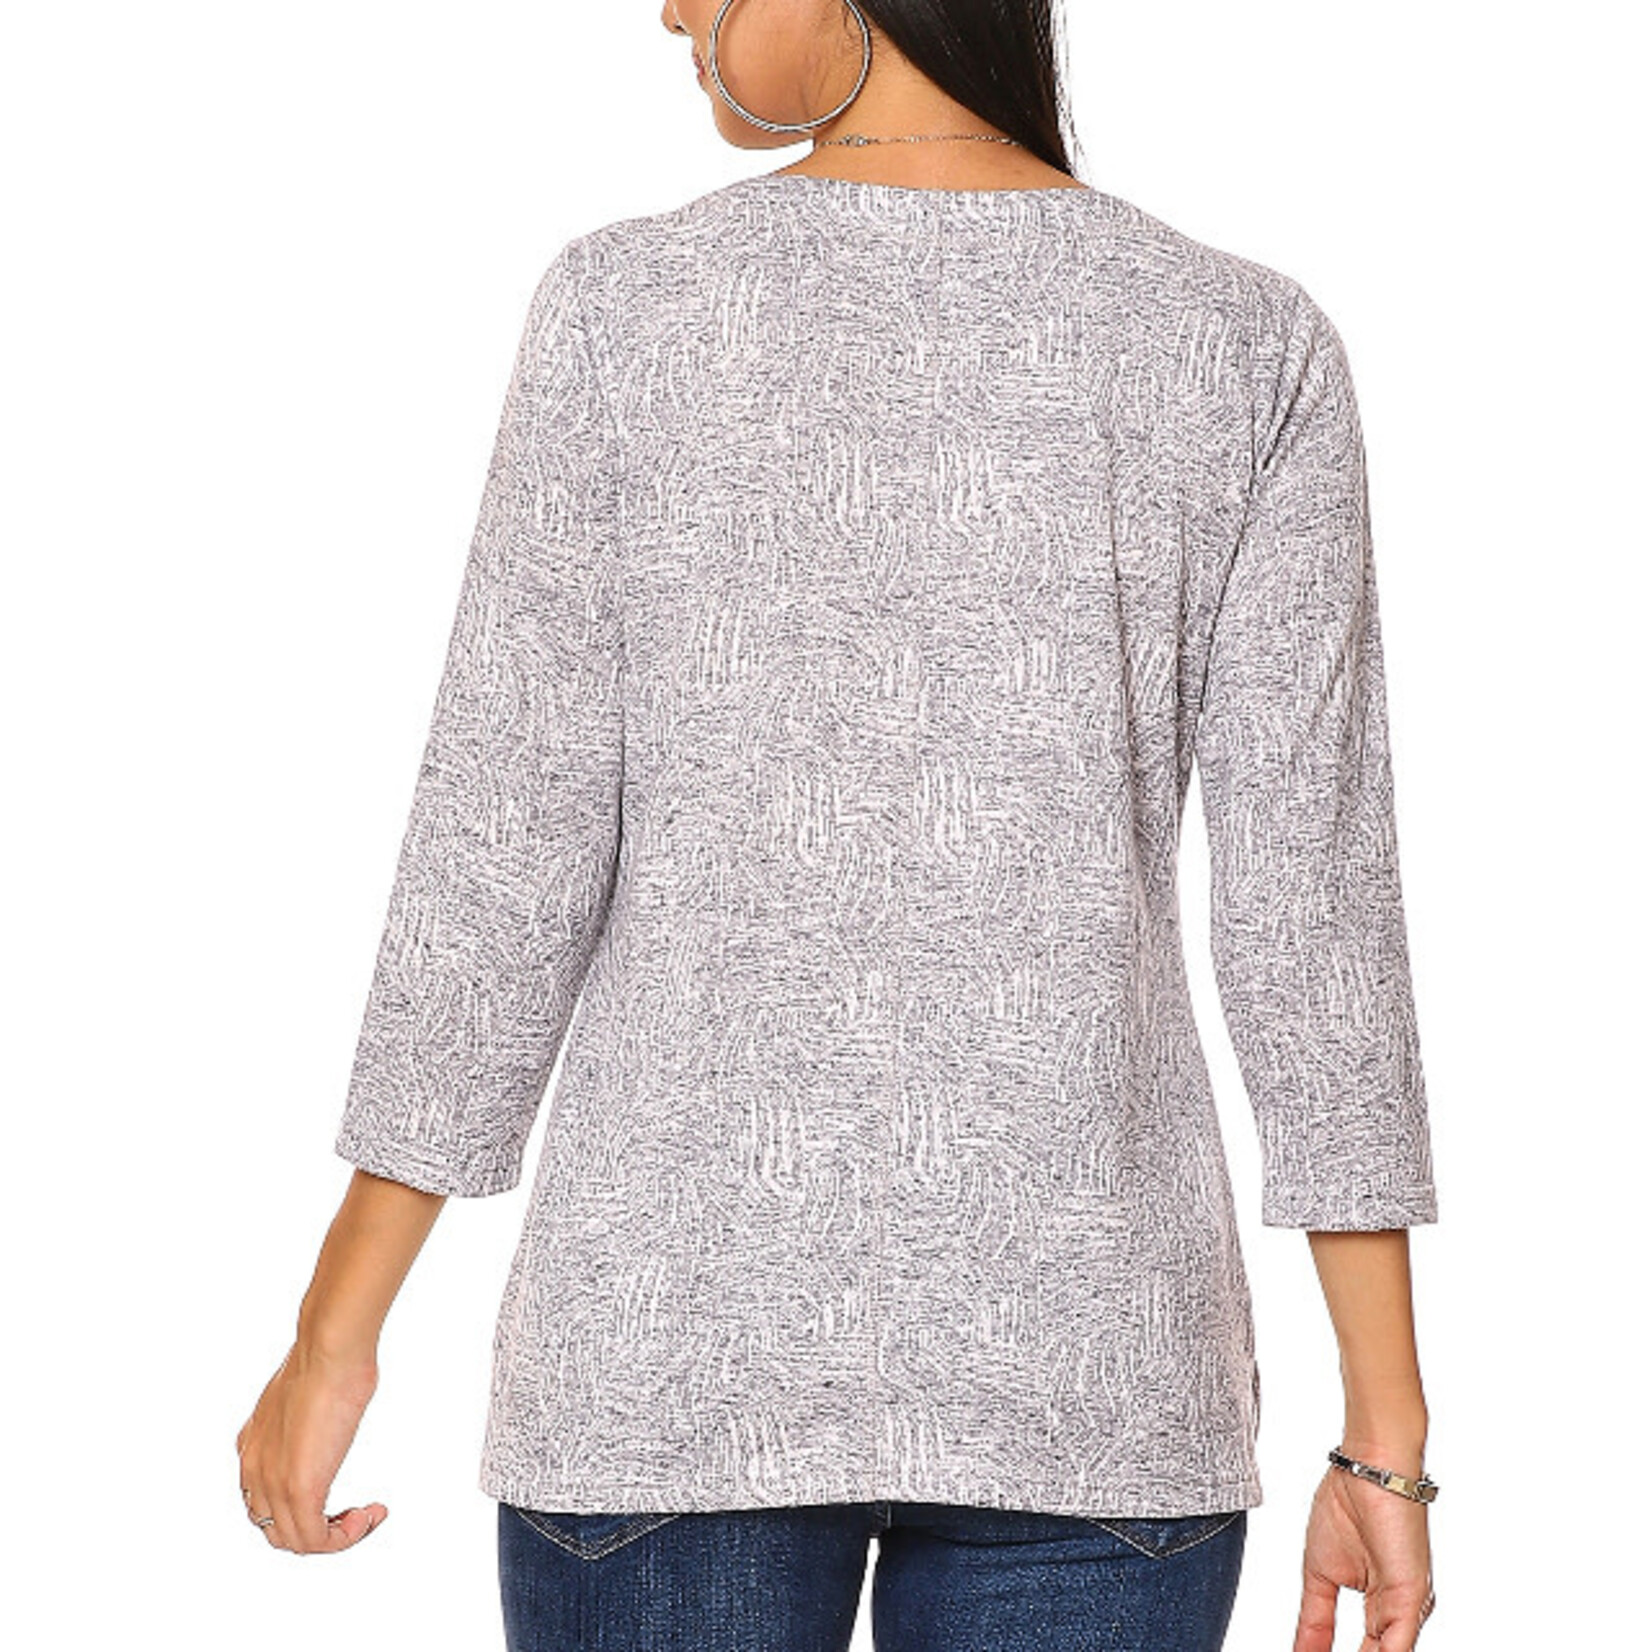 Parsley and Sage Grey & White Weave Design Pull Over Top